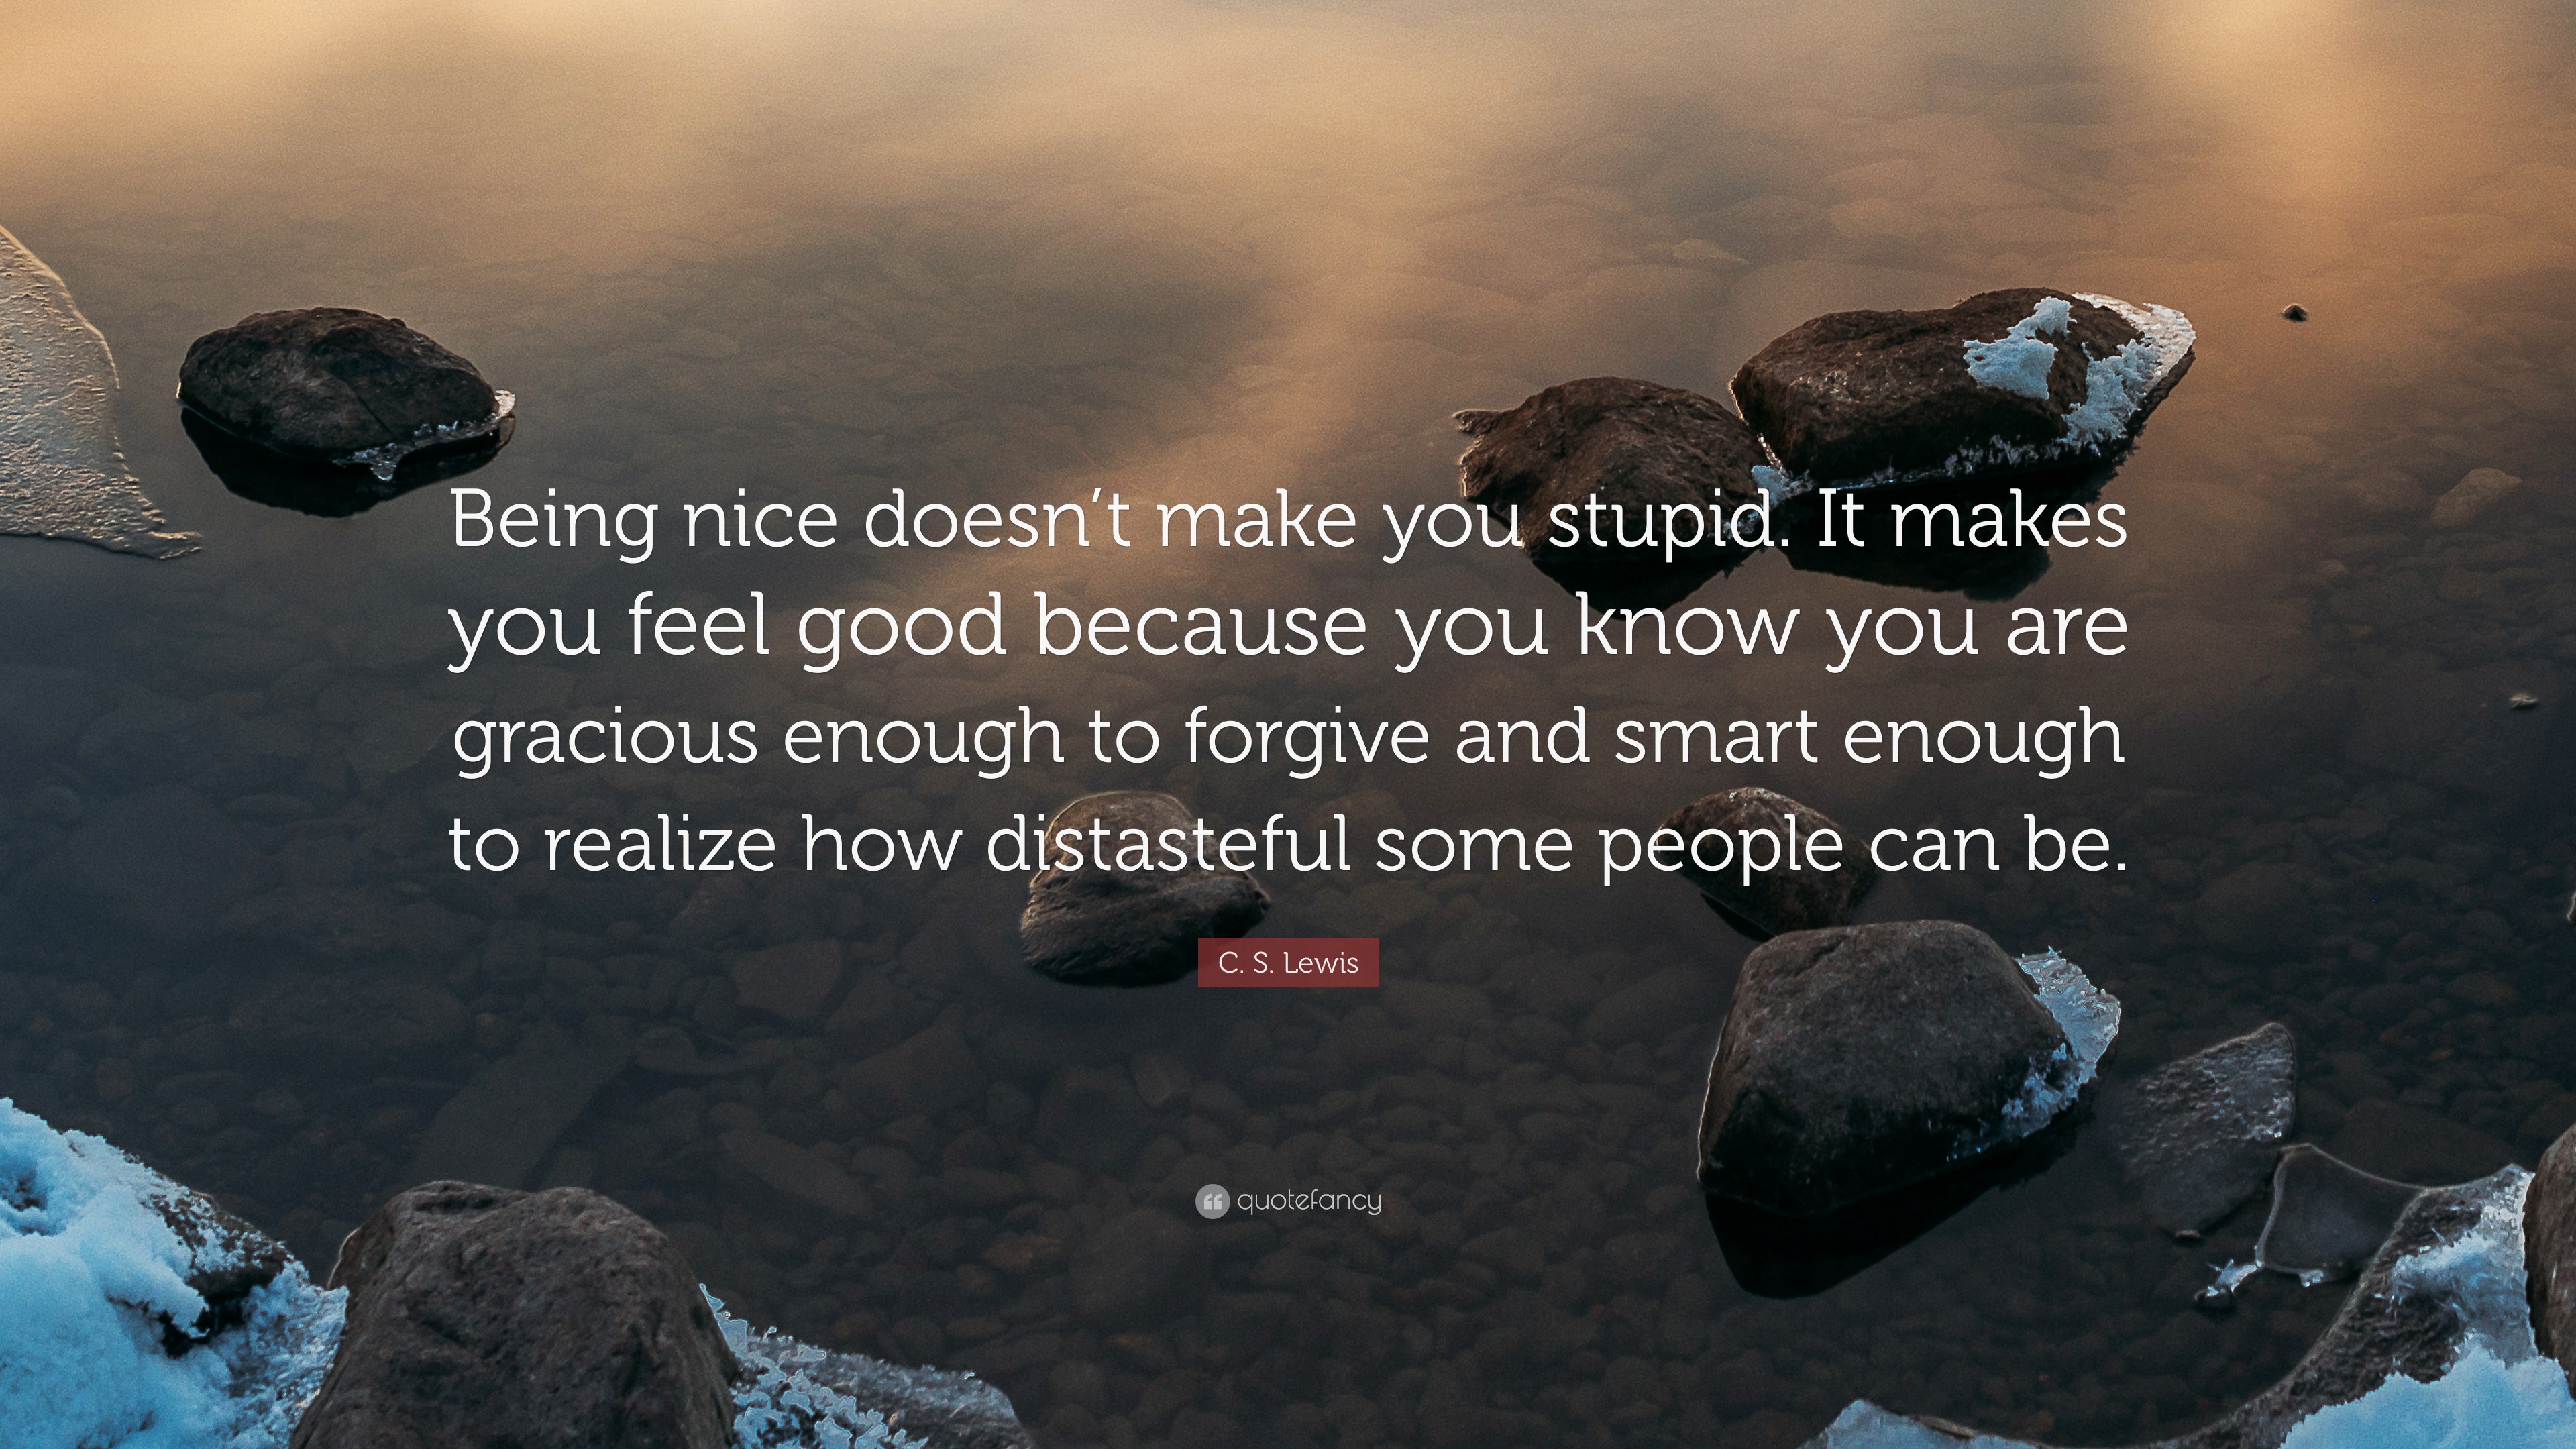 C S Lewis Quote Being Nice Doesn T Make You Stupid It Makes You Feel Good Because You Know You Are Gracious Enough To Forgive And Smart